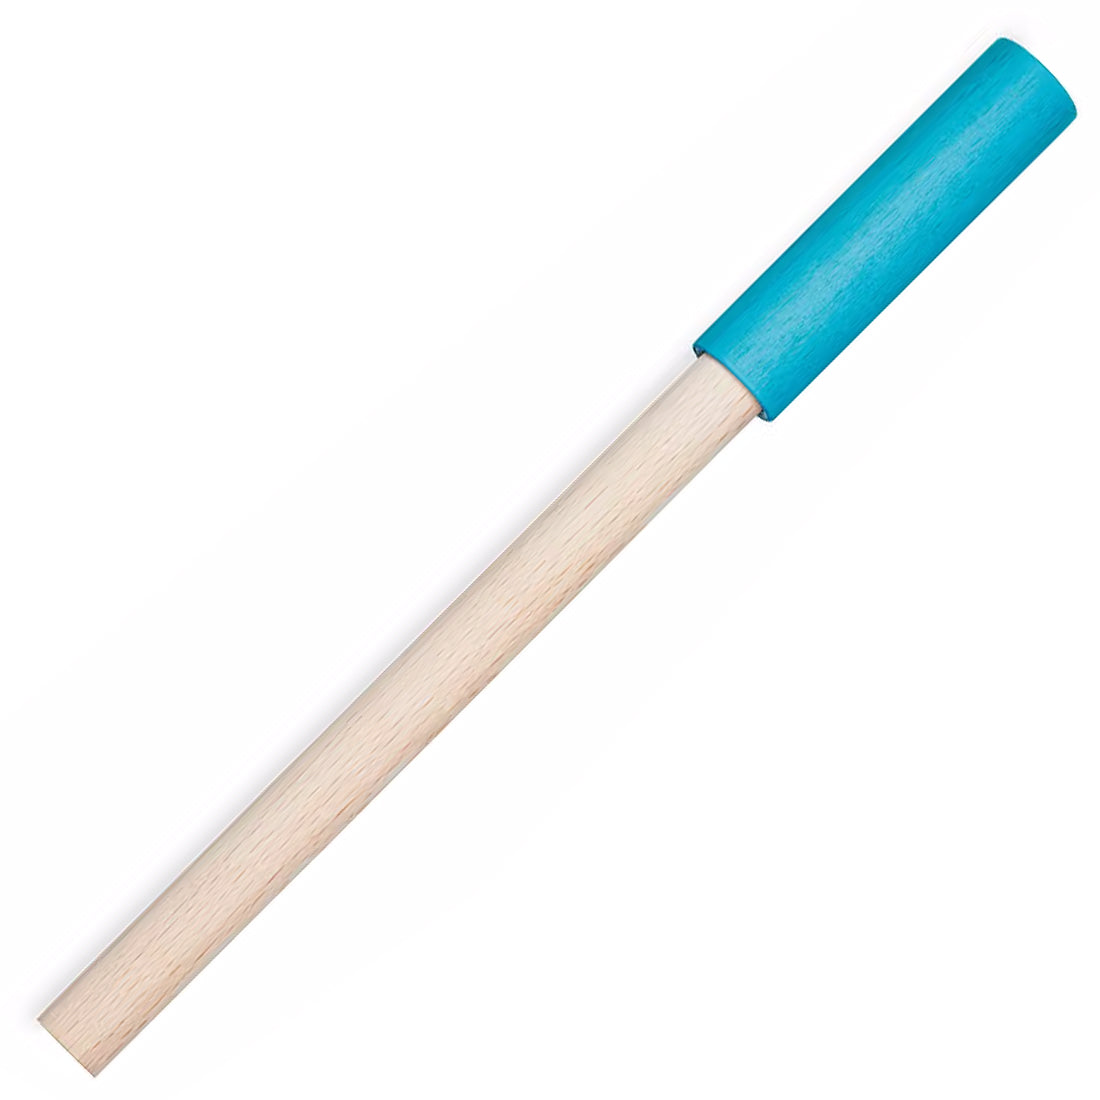 E+M Cap Wooden Ballpoint Pen Icy Blue. Made in Germany Beech Wood